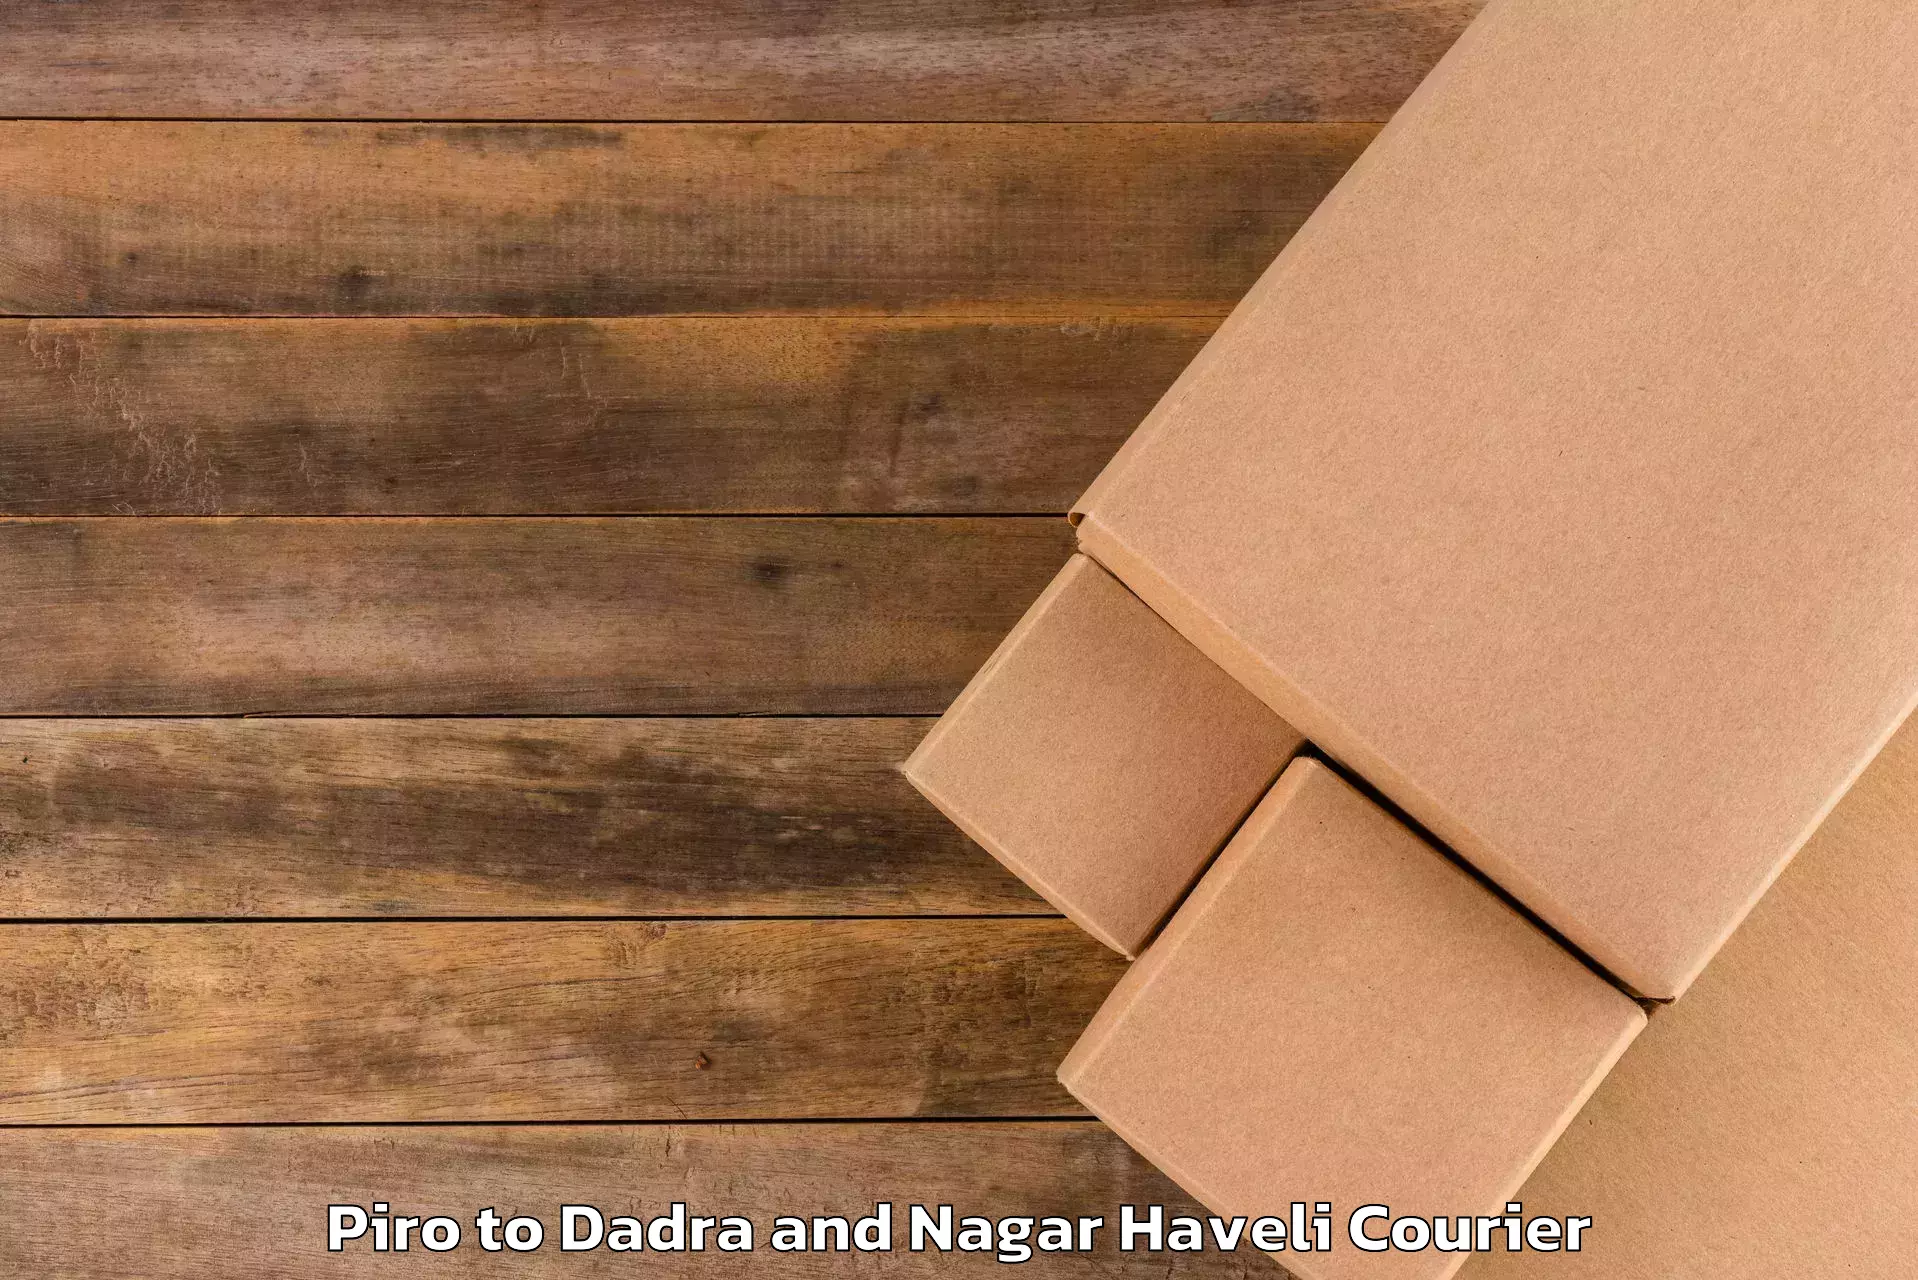 Baggage delivery scheduling in Piro to Dadra and Nagar Haveli